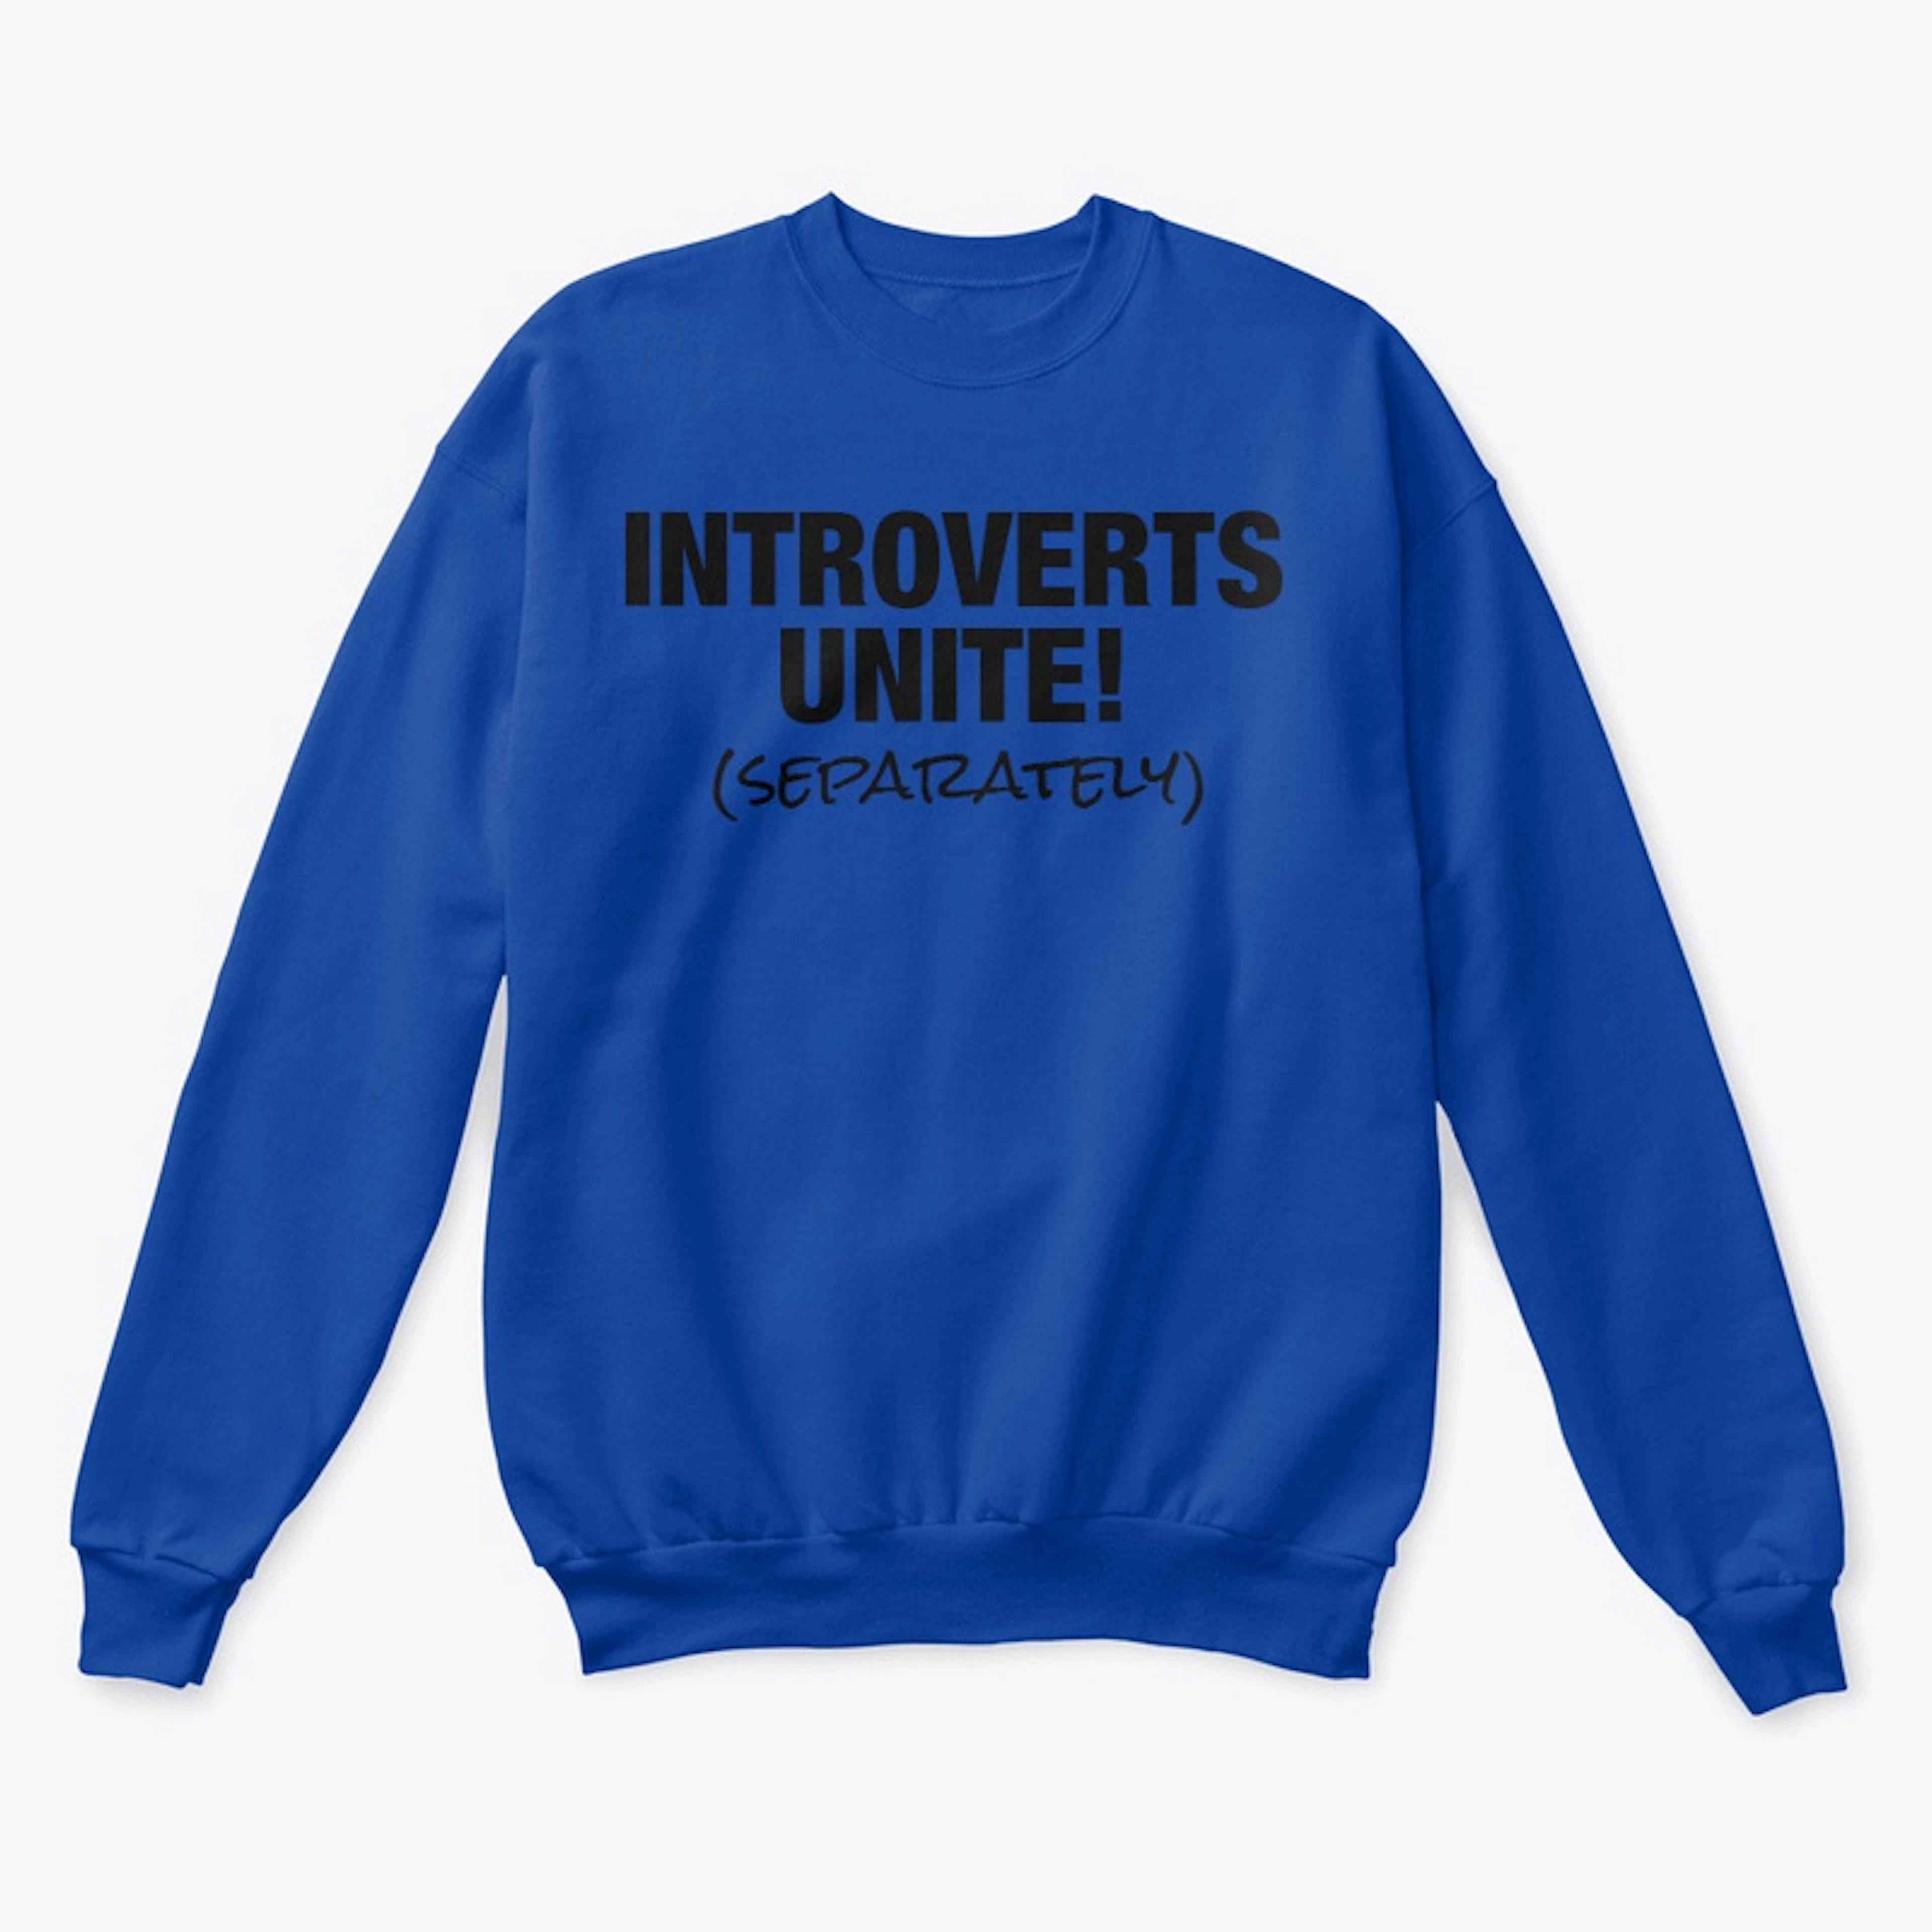 "The Introvert Club"